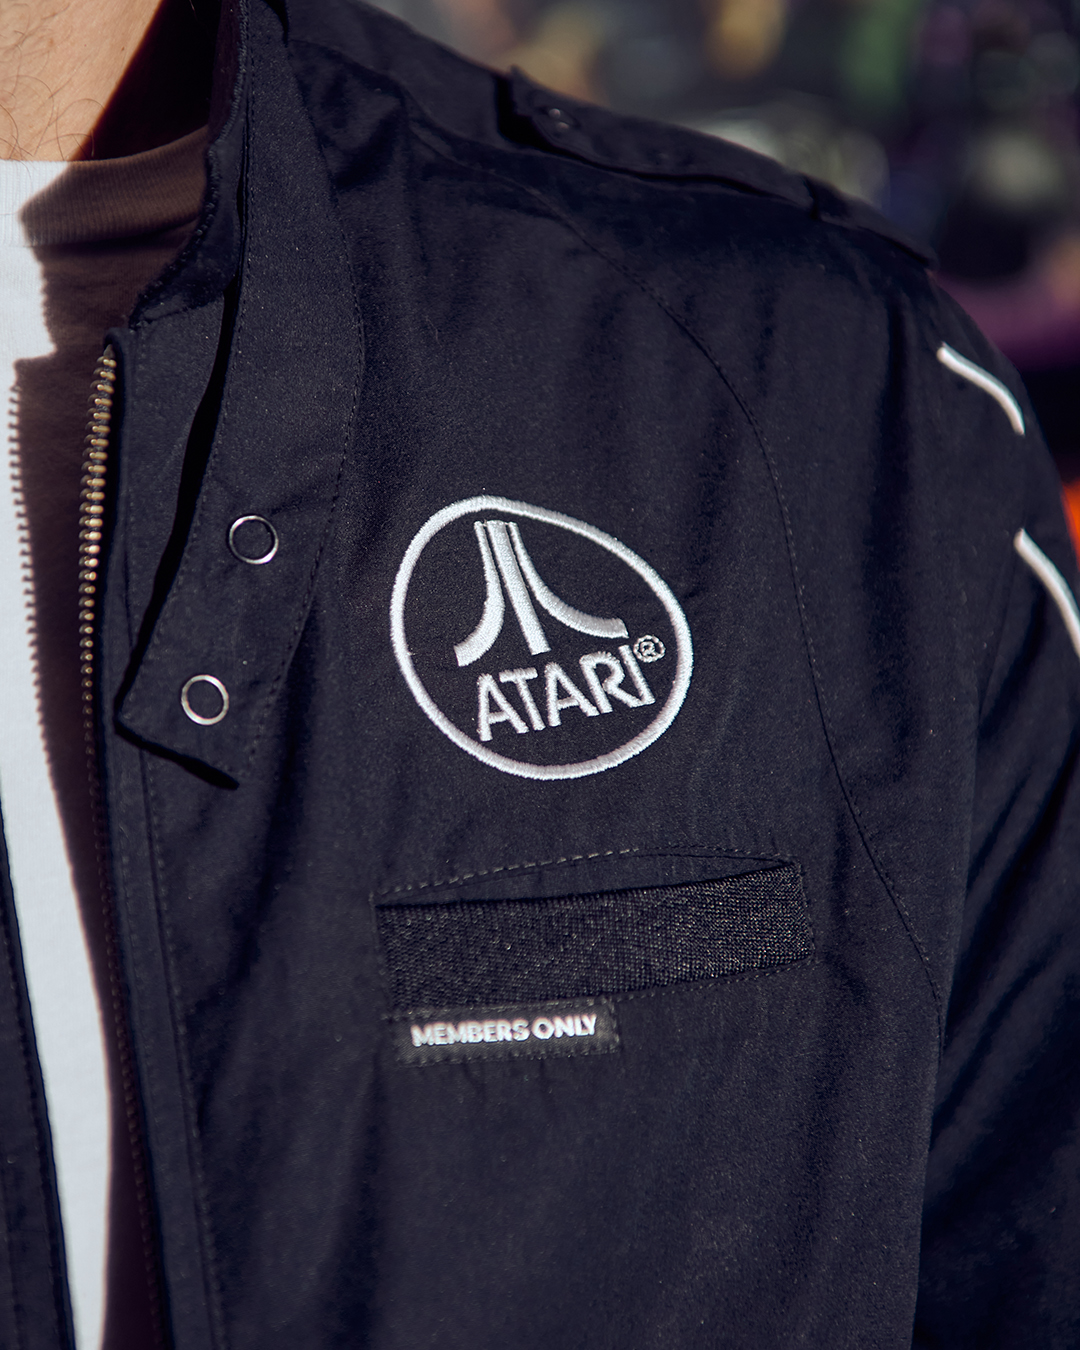 Atari Reintroduces the Atari Club Jacket in Collaboration with 80s ...